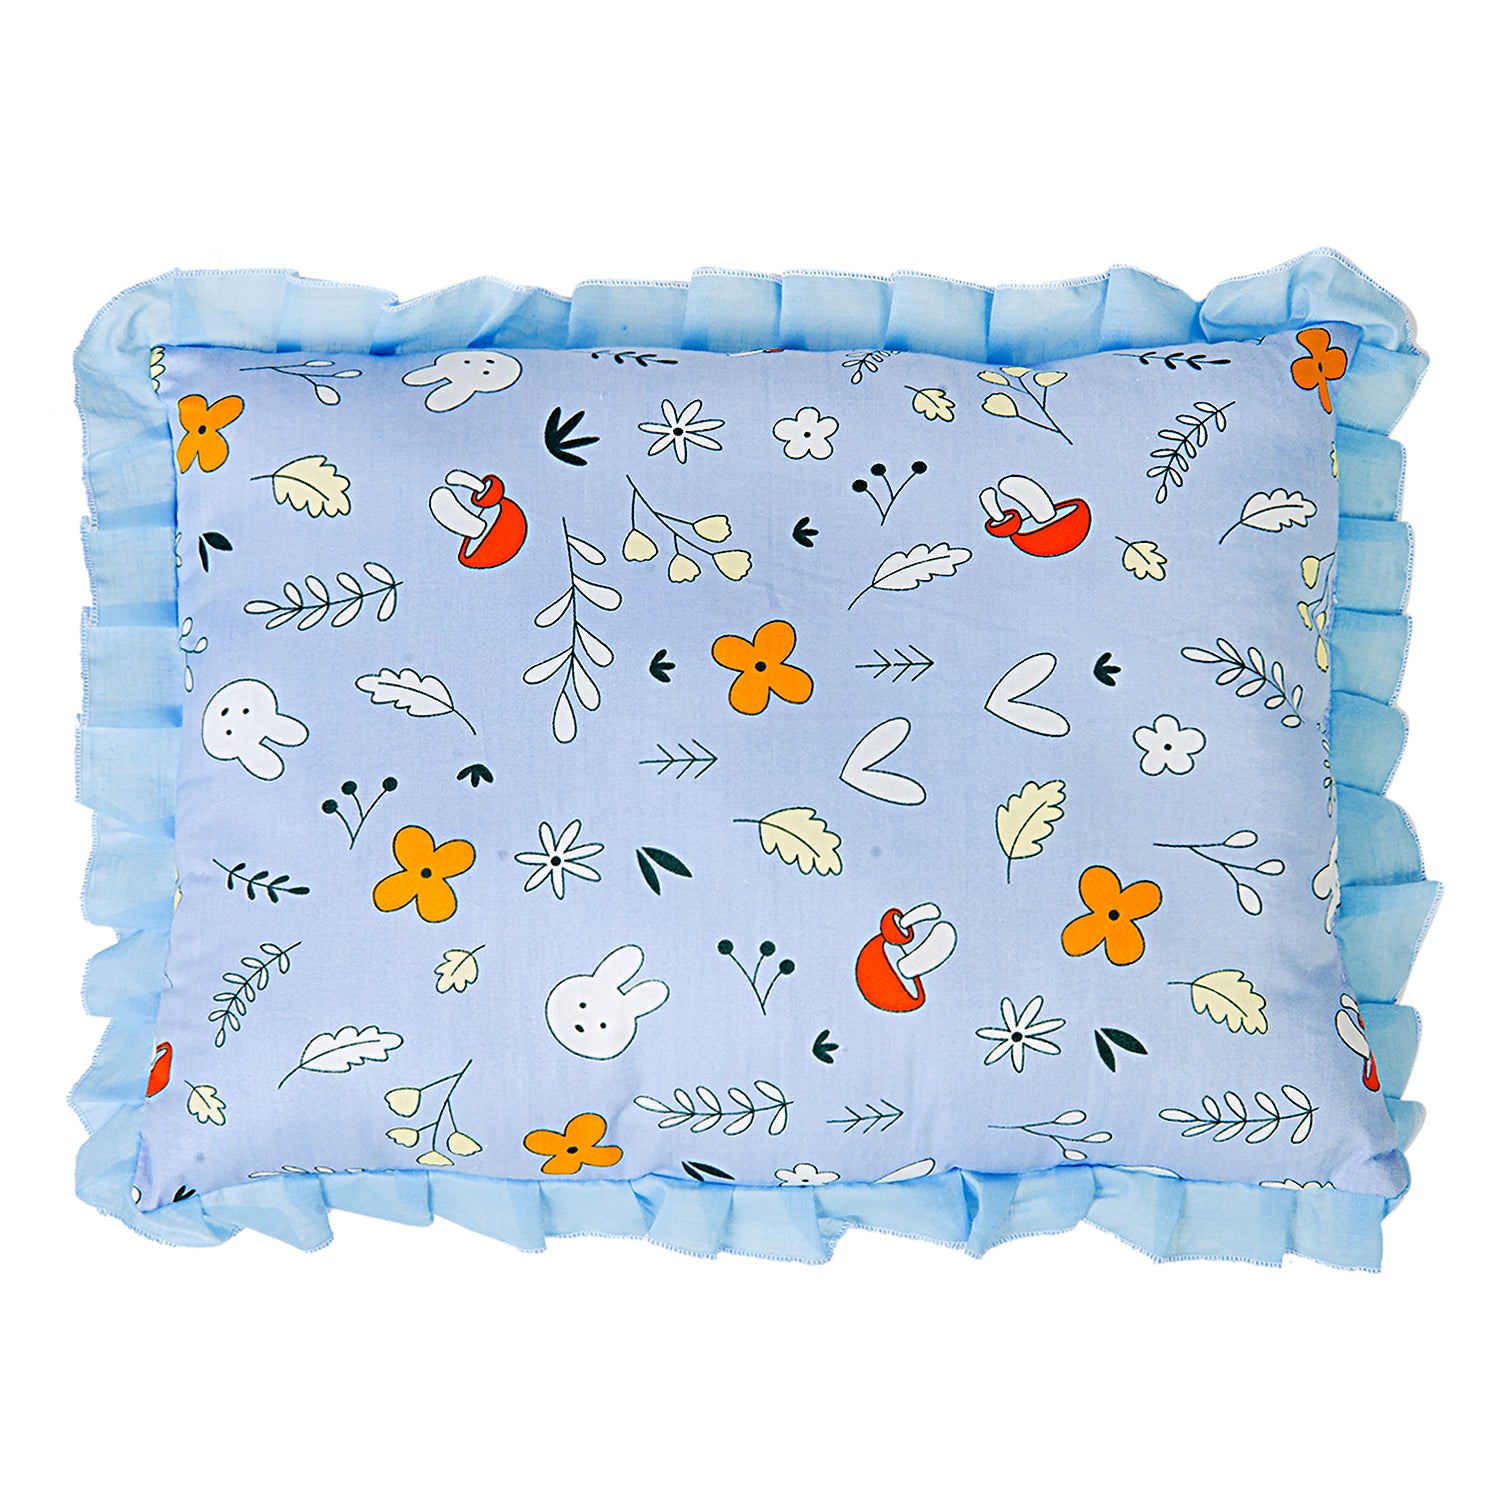 Floral Blue Rectangular Pillow - Sizes available - Baby Moo